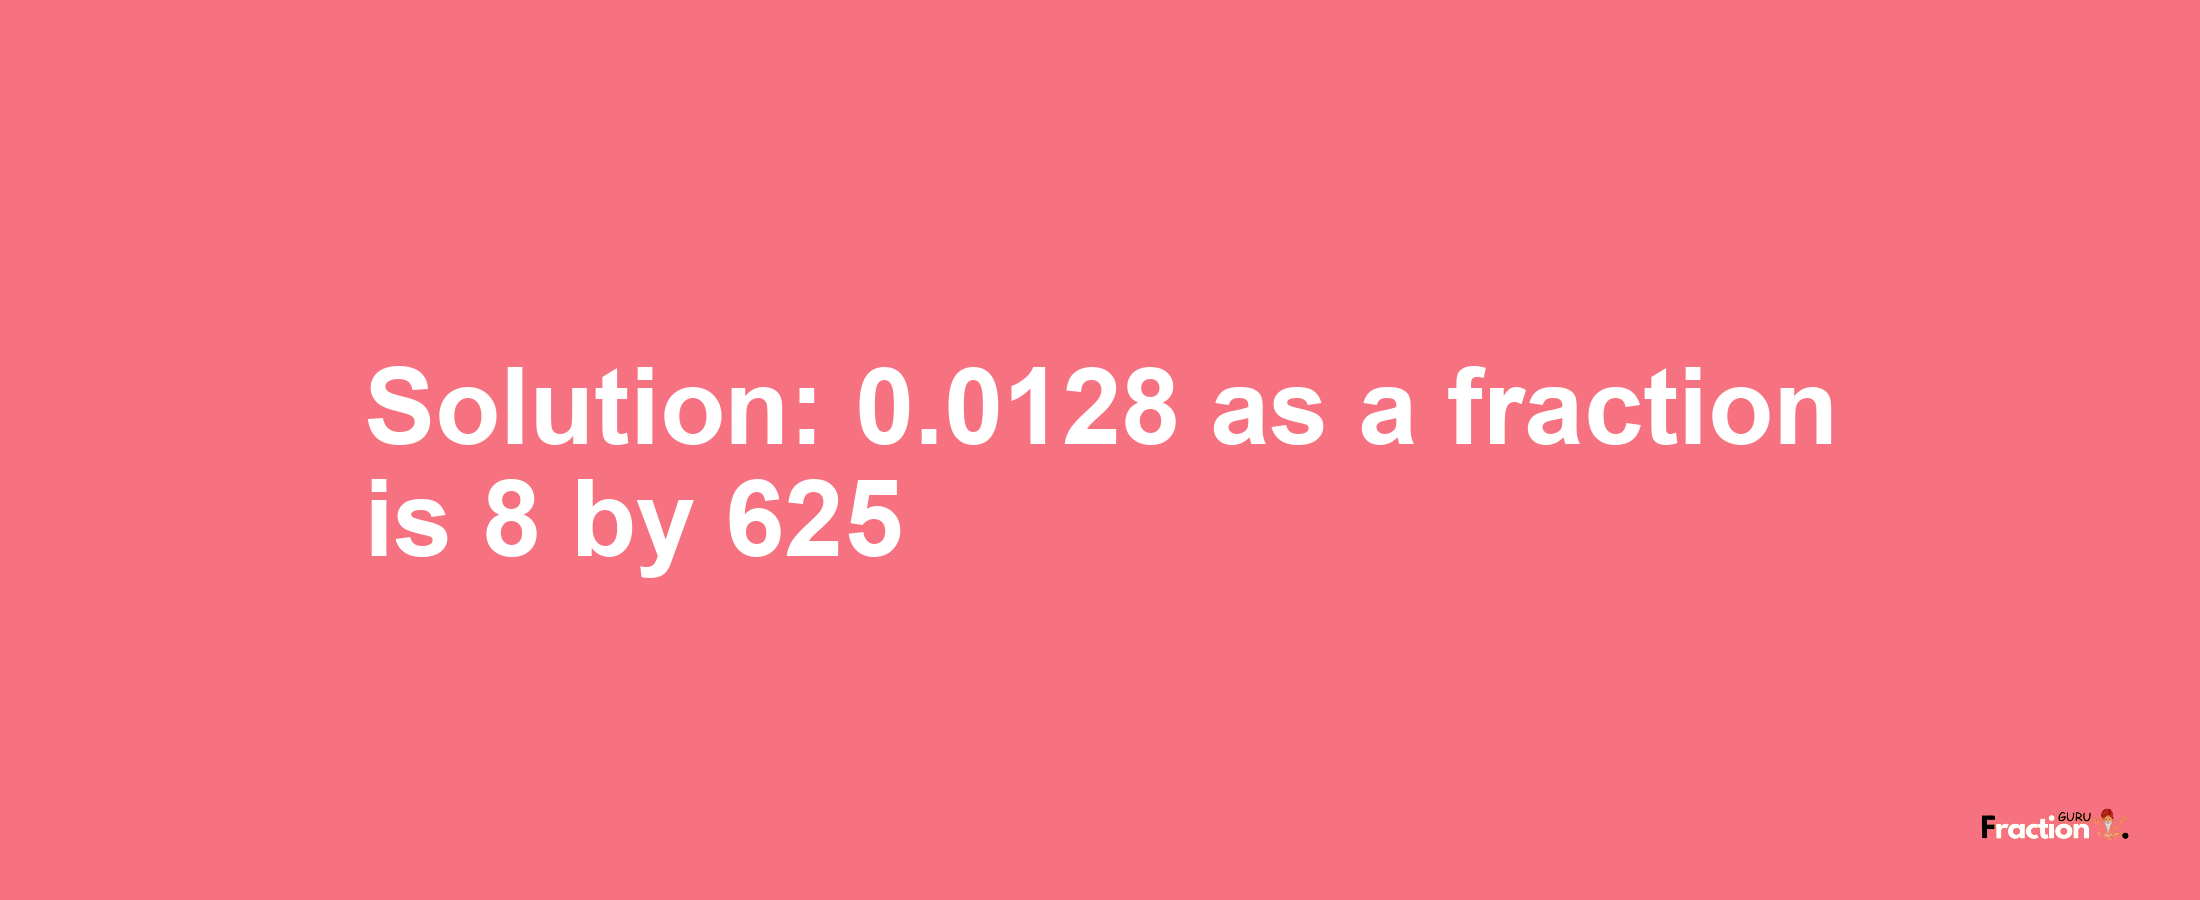 Solution:0.0128 as a fraction is 8/625